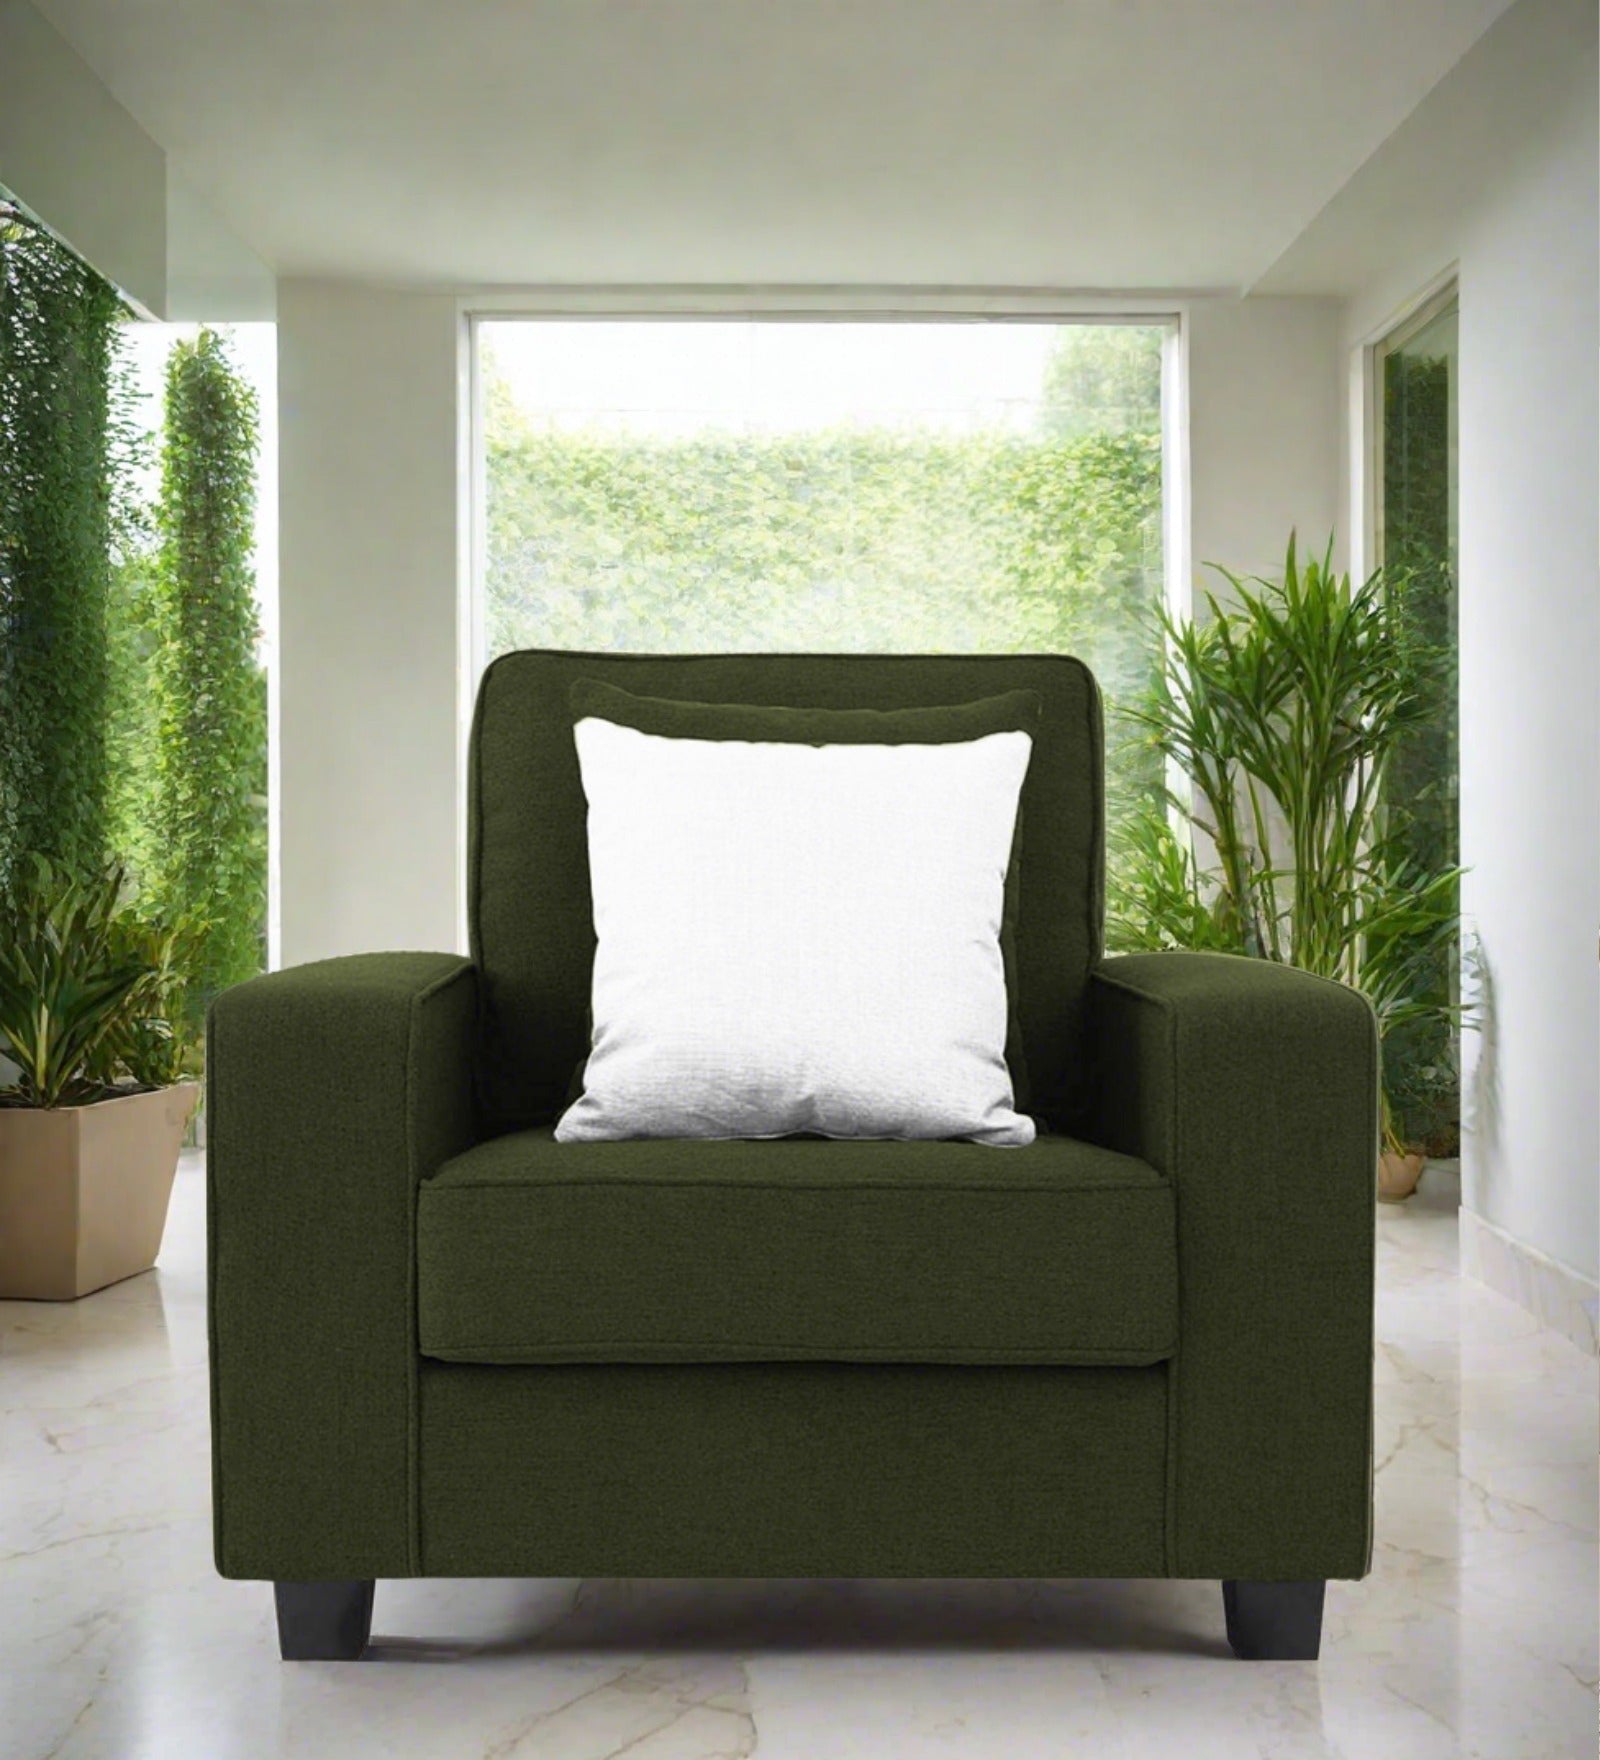 Ladybug Fabric 1 Seater Sofa In Olive Green Colour